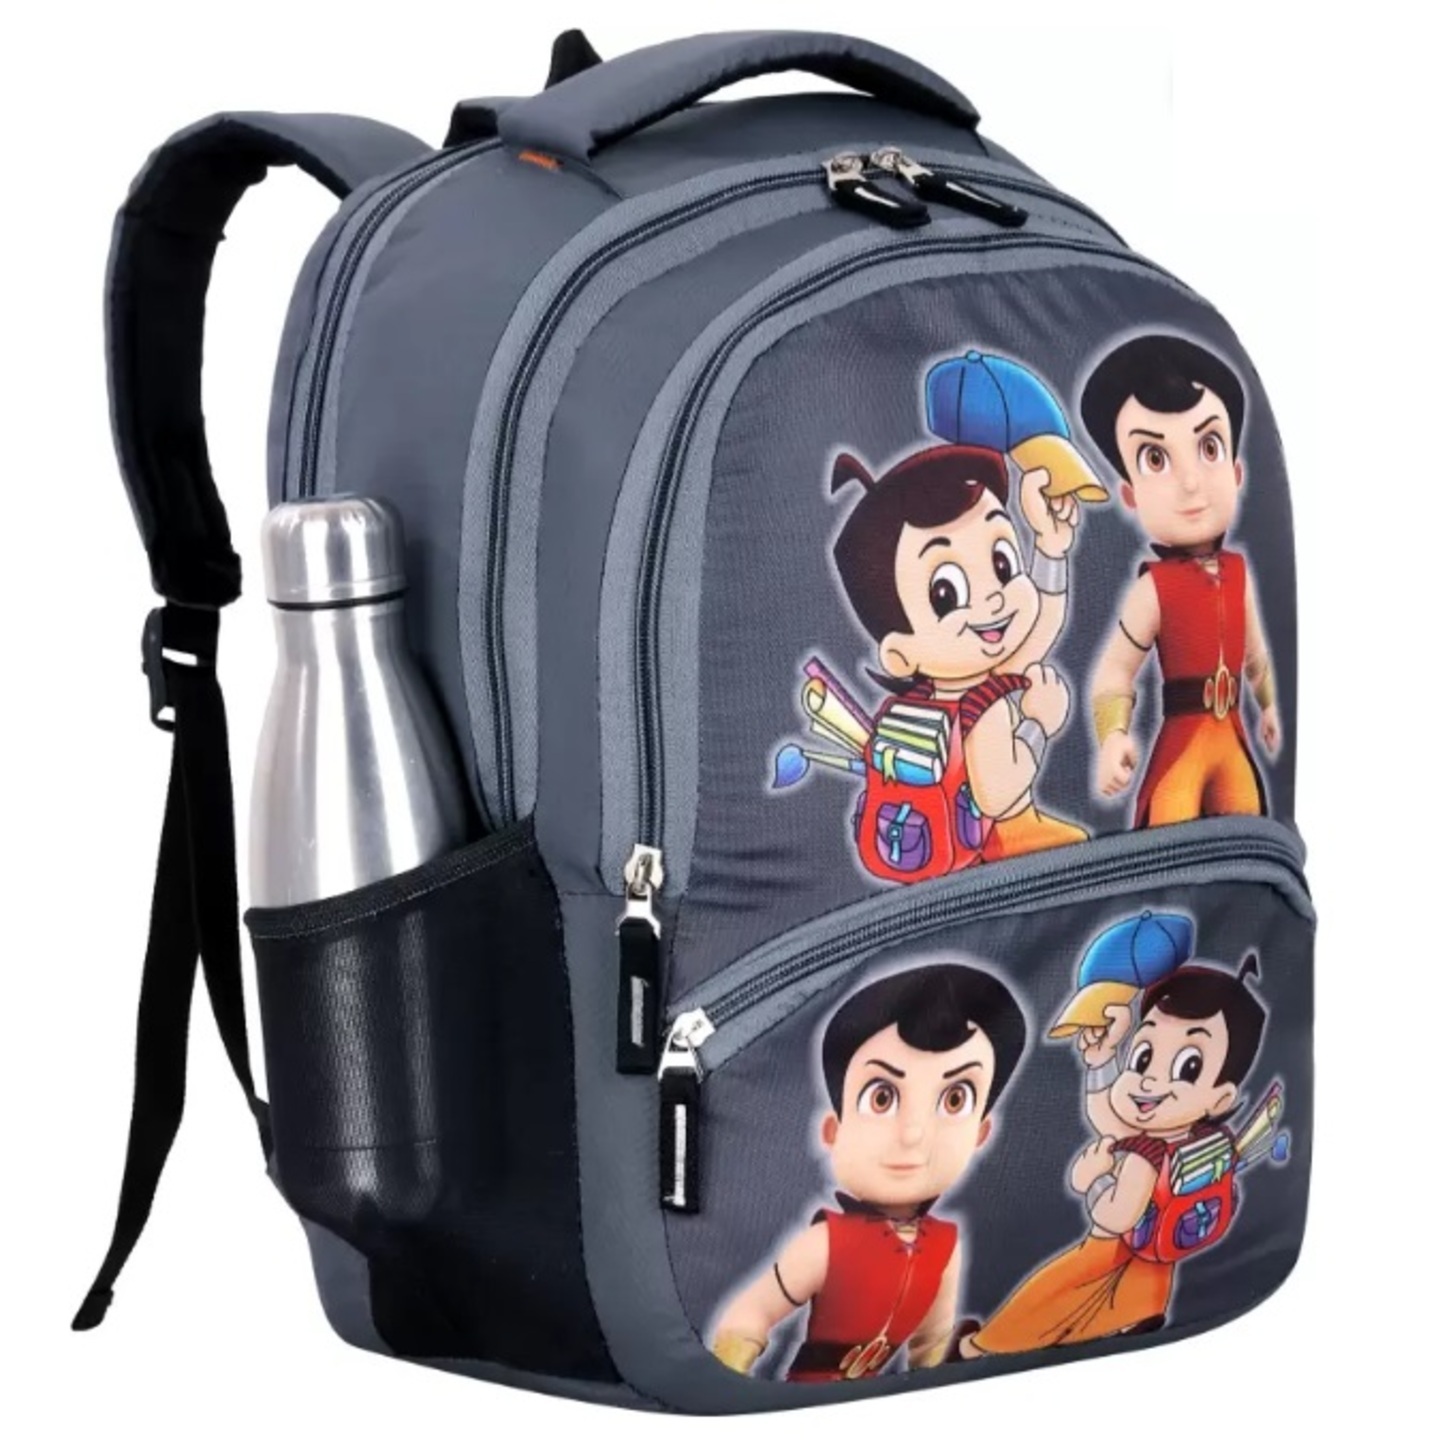 Kids School Backpack for Boys & Girls Age 4-8 Years